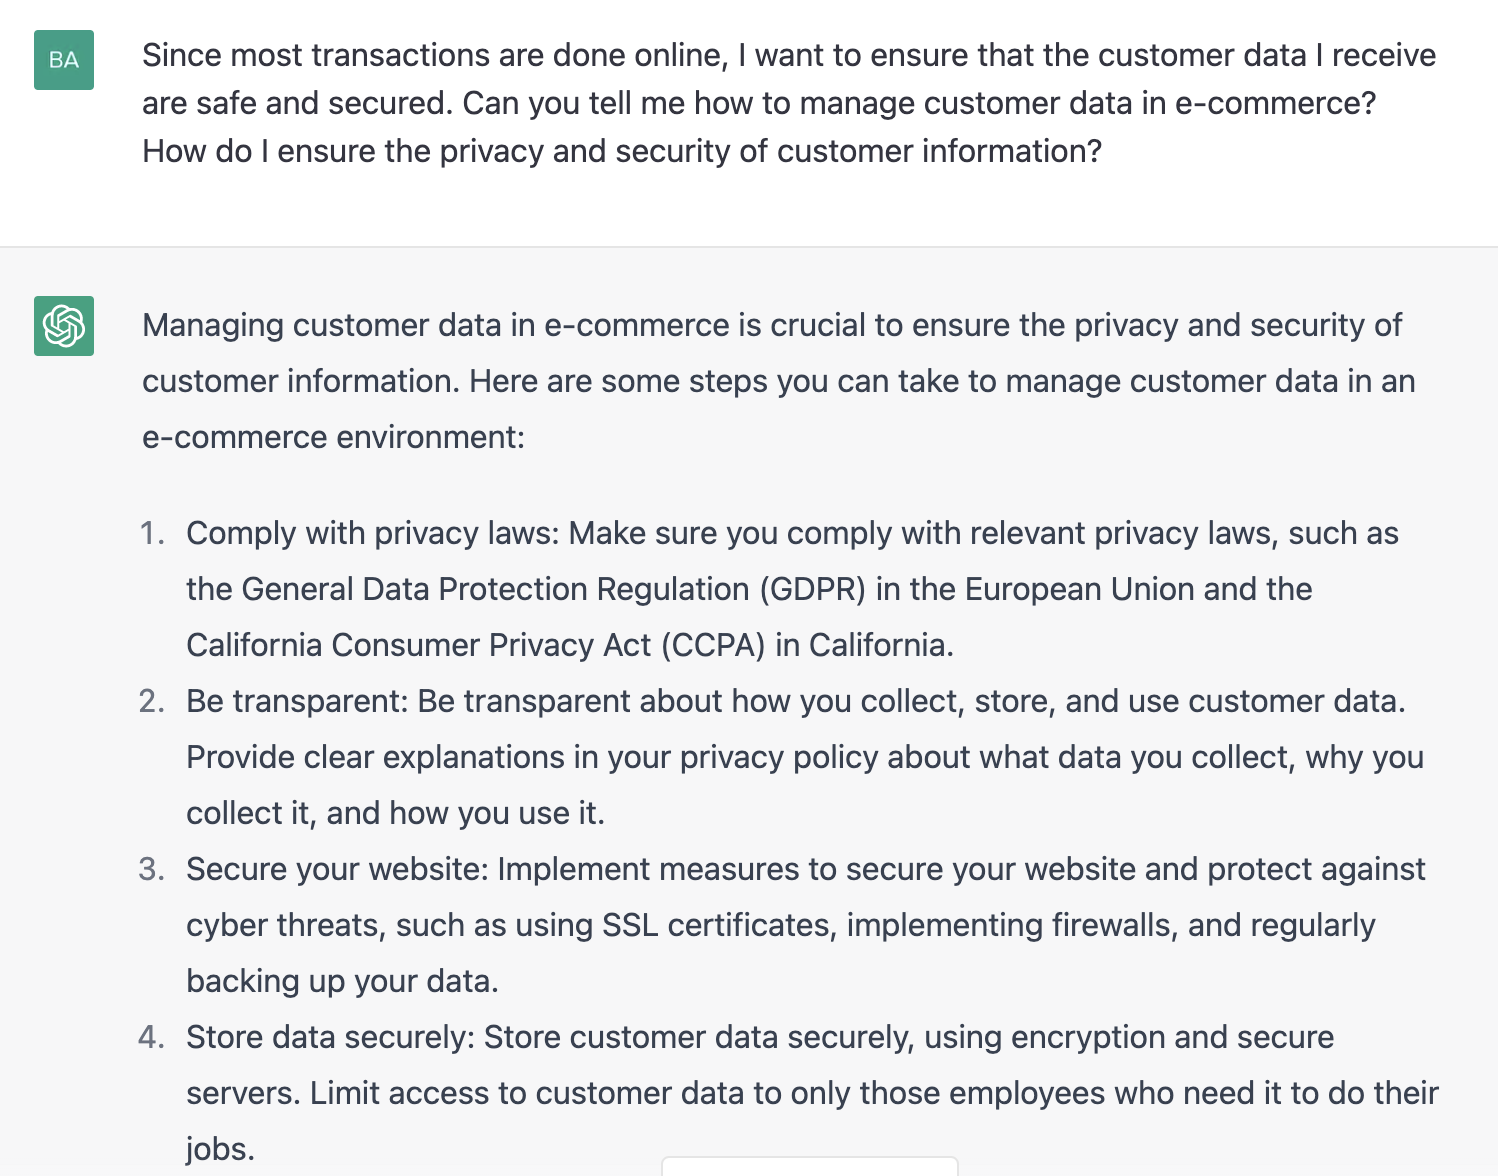 ChatGPT prompt about managing customer data in e-commerce